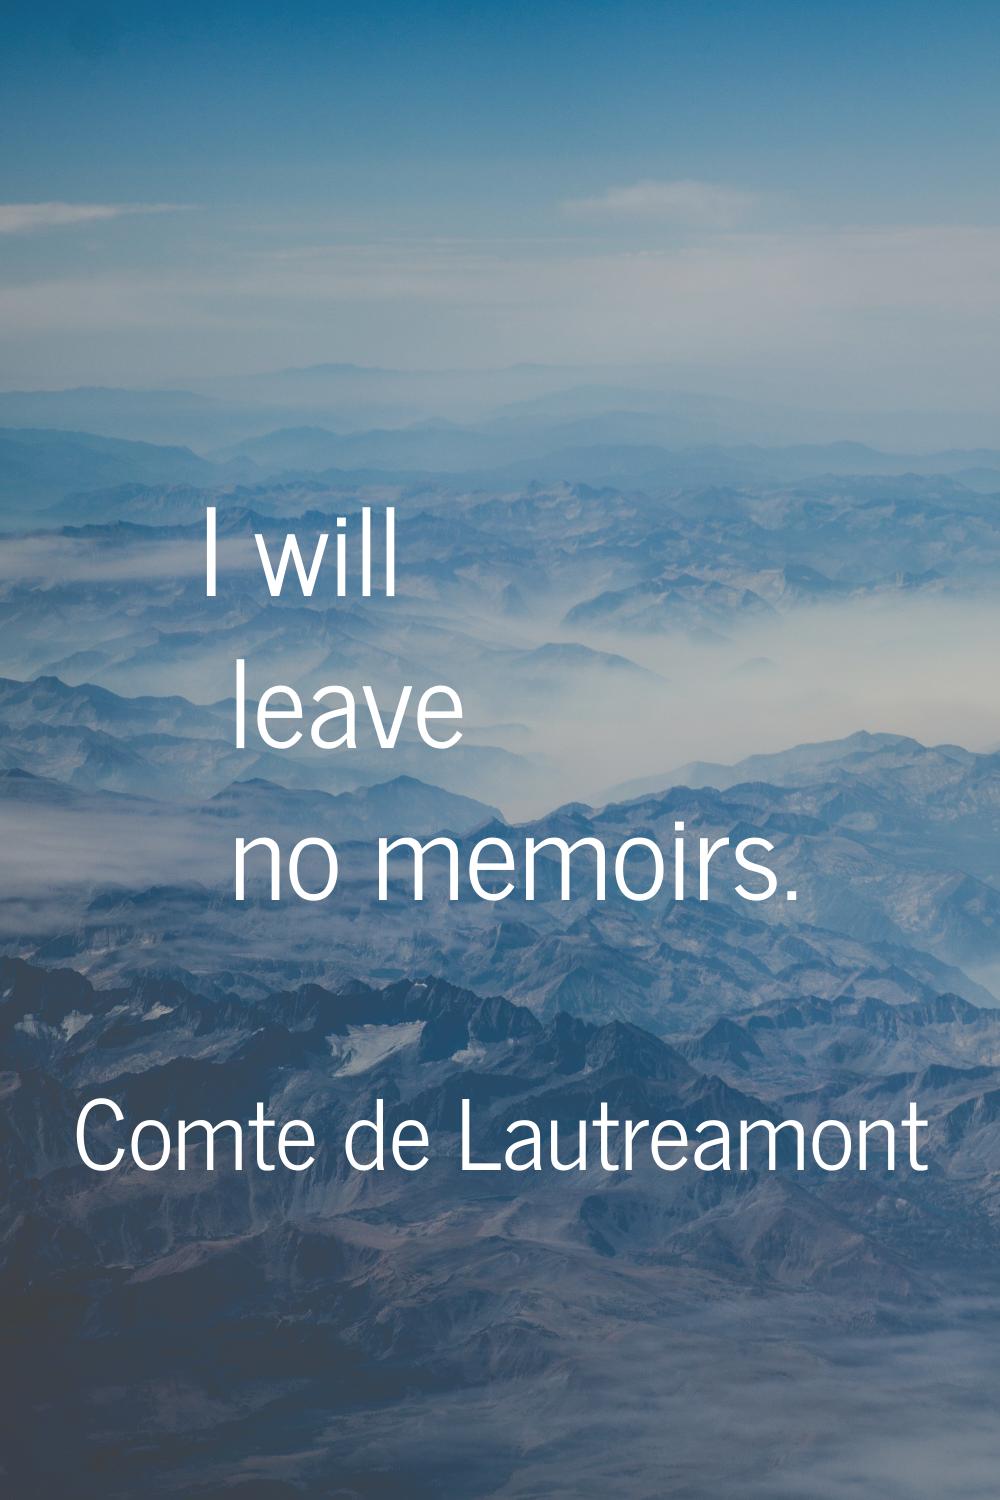 I will leave no memoirs.